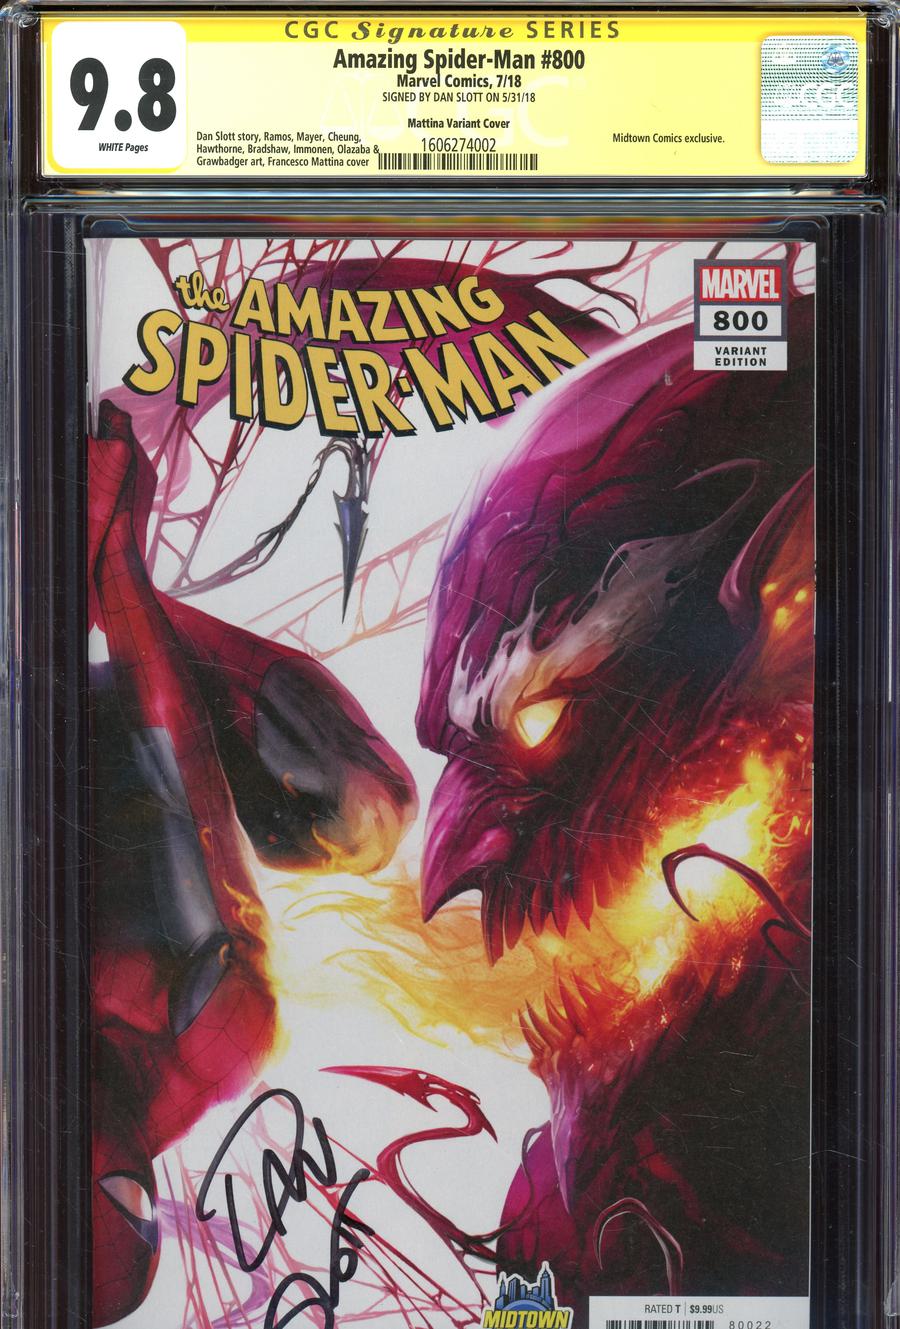 Amazing Spider-Man Vol 4 #800  Midtown Exclusive Francesco Mattina & Will Sliney Connecting Cover Signed By Dan Slott CGC 9.8 (Right Side)